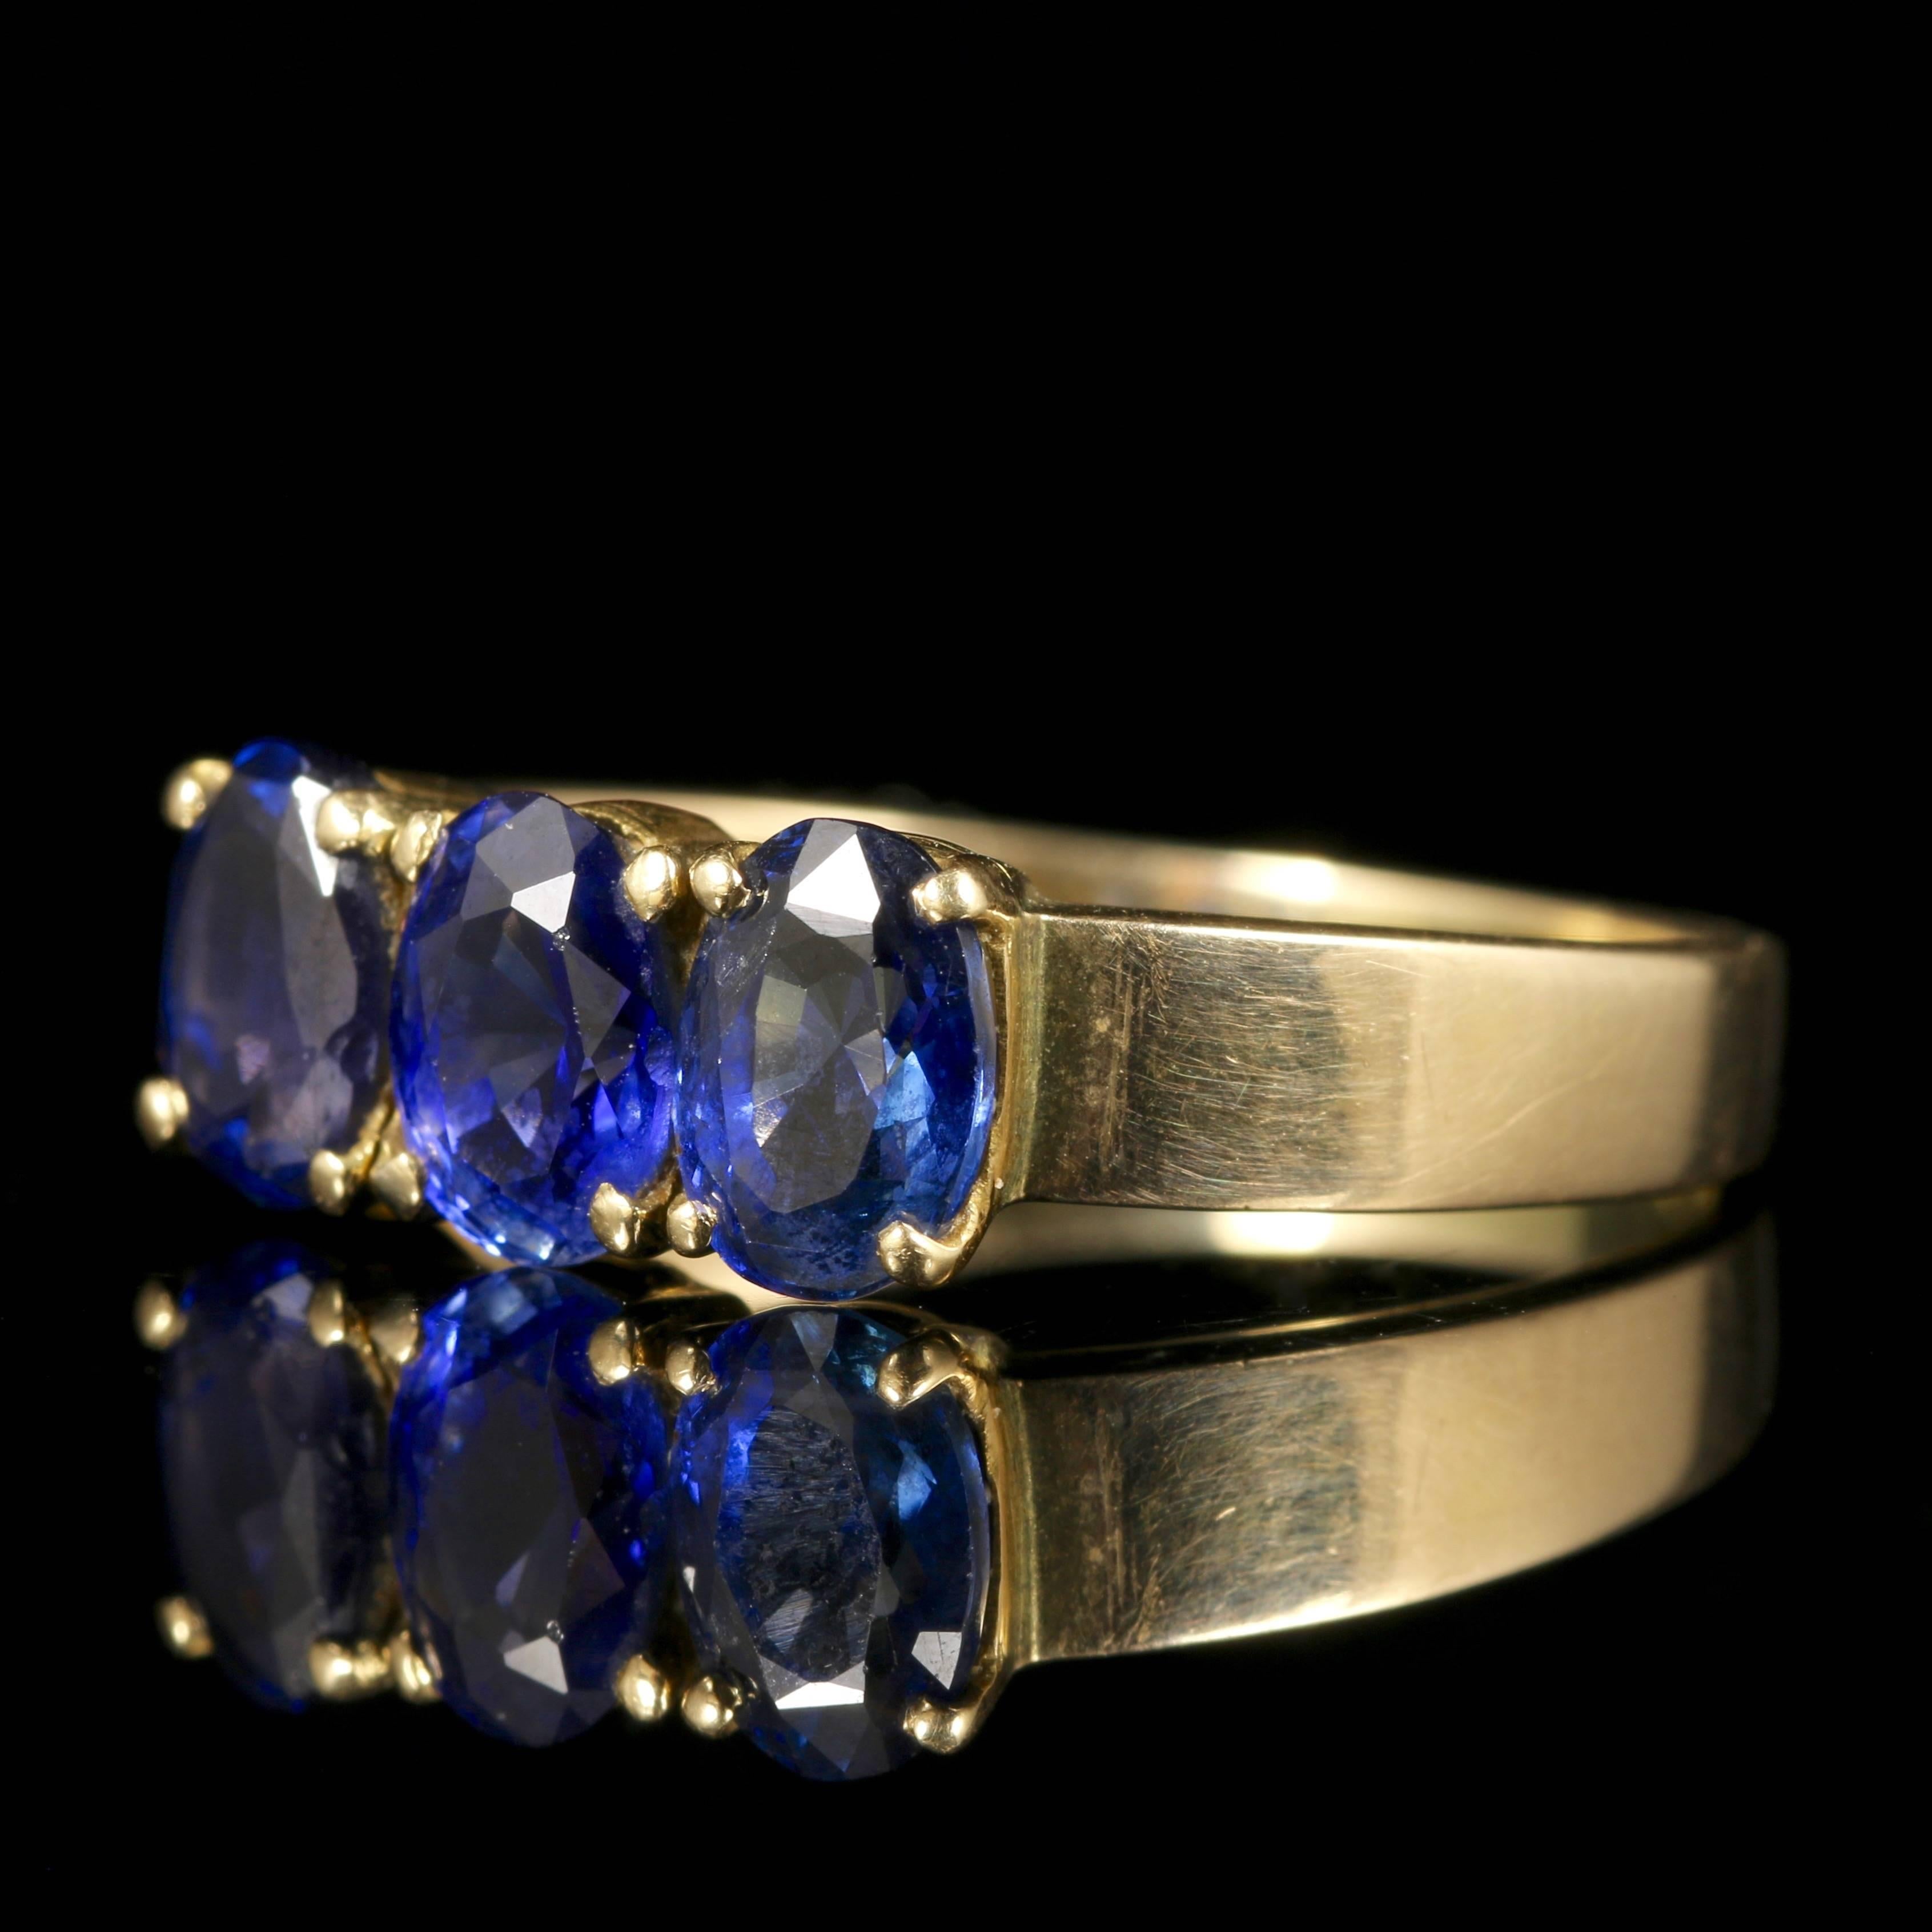 This fabulous Victorian trilogy ring boasts stunning rich Blue Sapphires all set in 18ct Yellow Gold.
A trilogy of Blue Sapphires sits across the centre of the ring complimenting the 18ct Yellow Gold. 
Trilogy stands for past, present, future, or